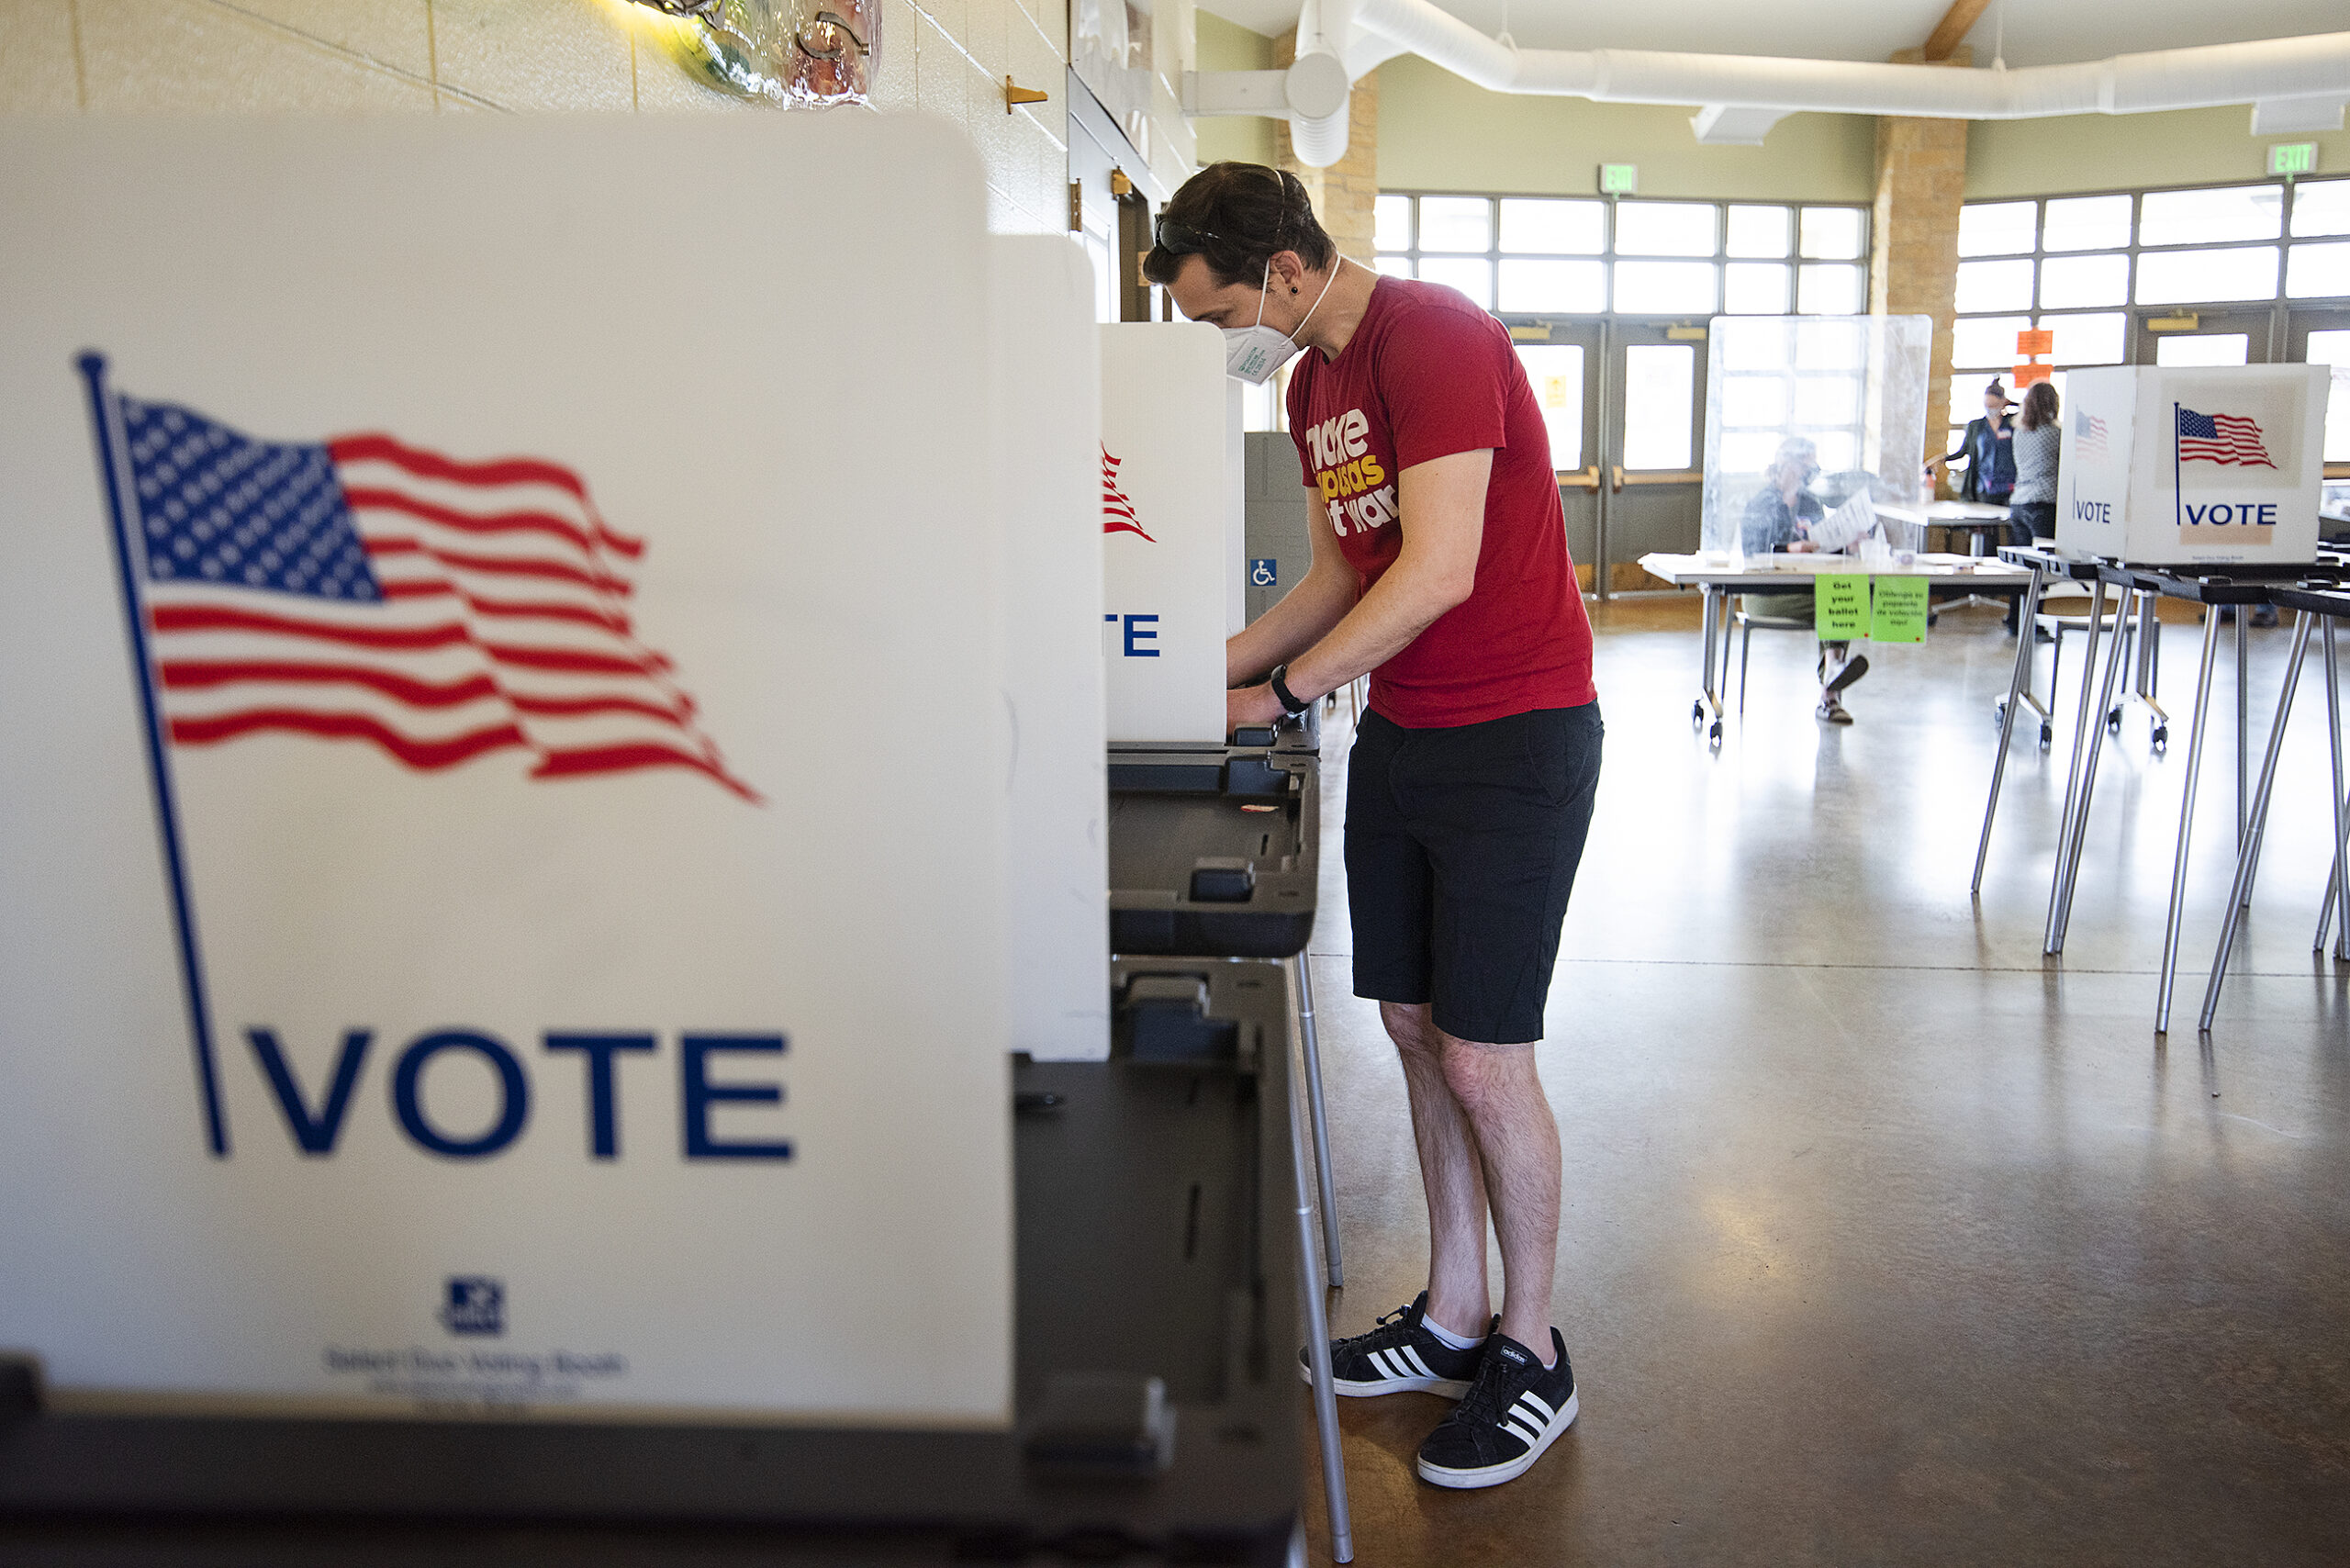 A voter in a red t-shirt fills out a ballot.